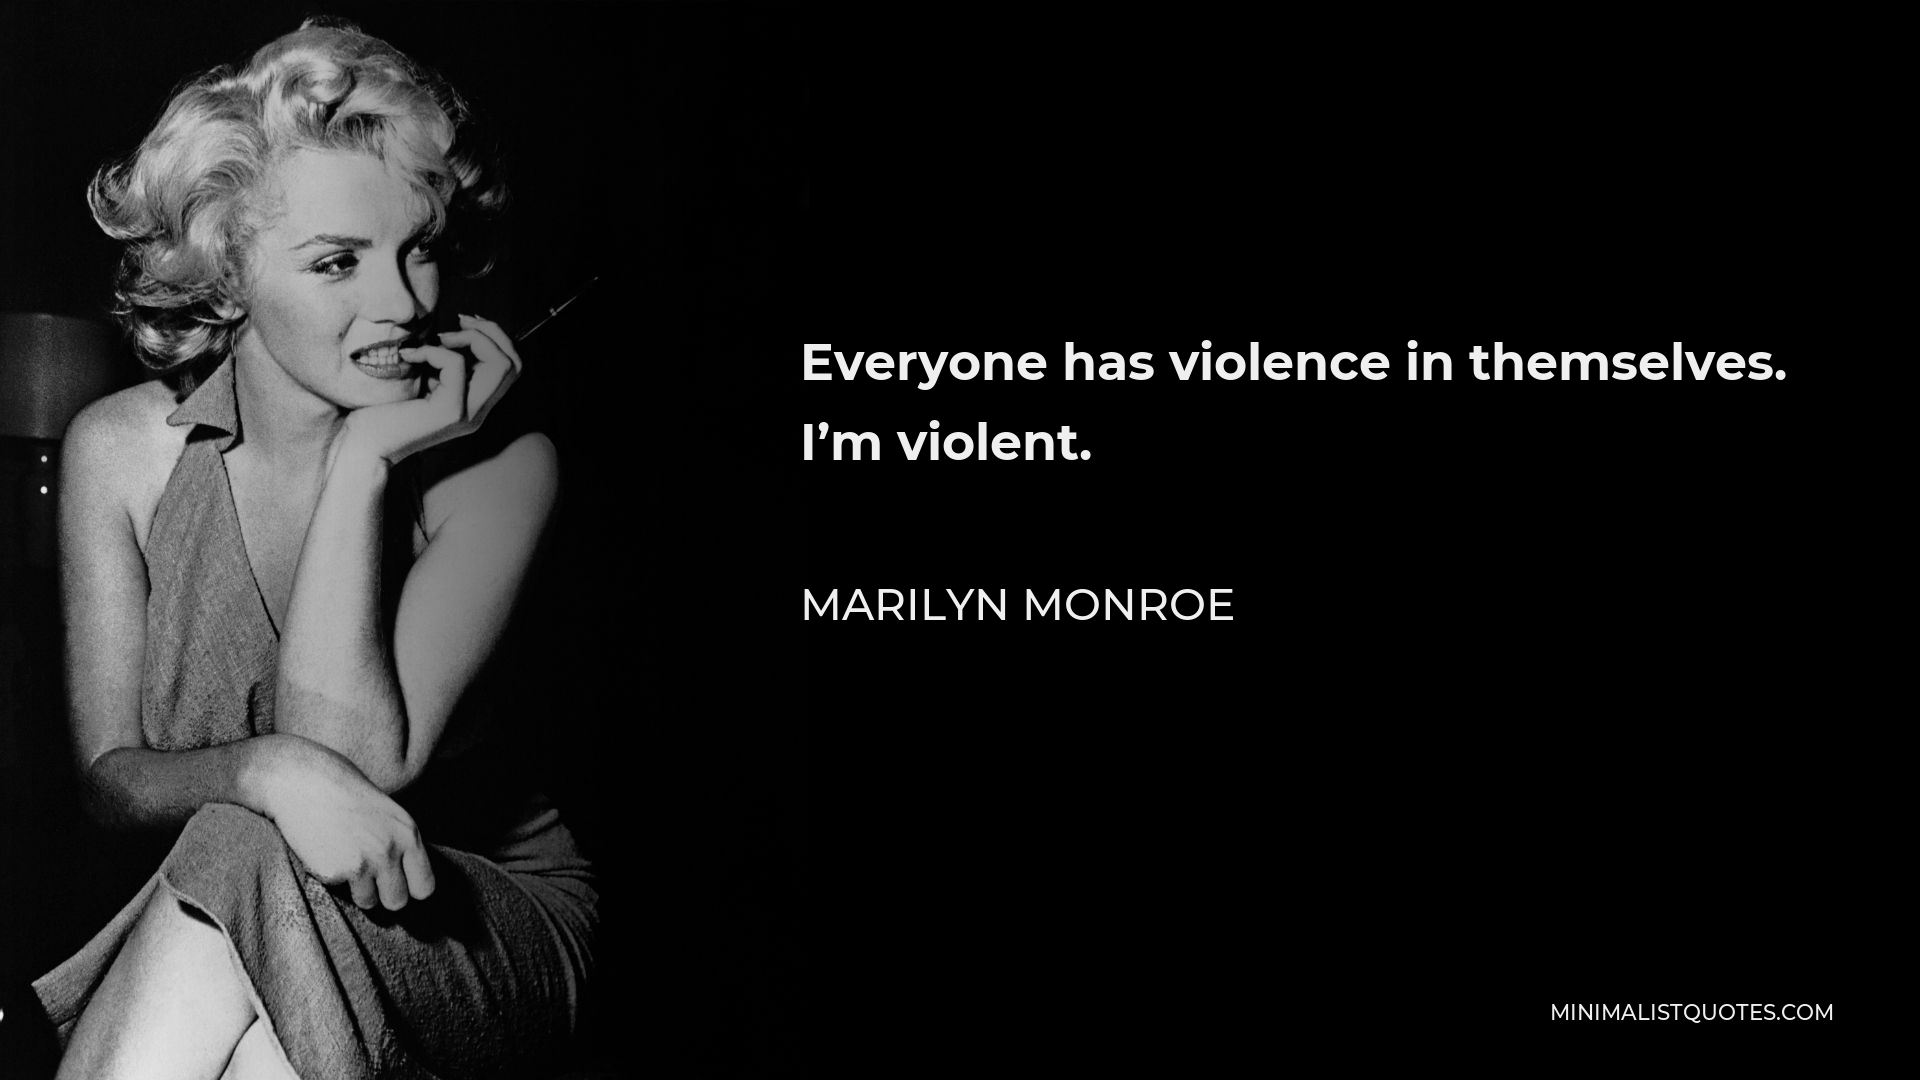 Marilyn Monroe Quote - Everyone has violence in themselves. I’m violent.